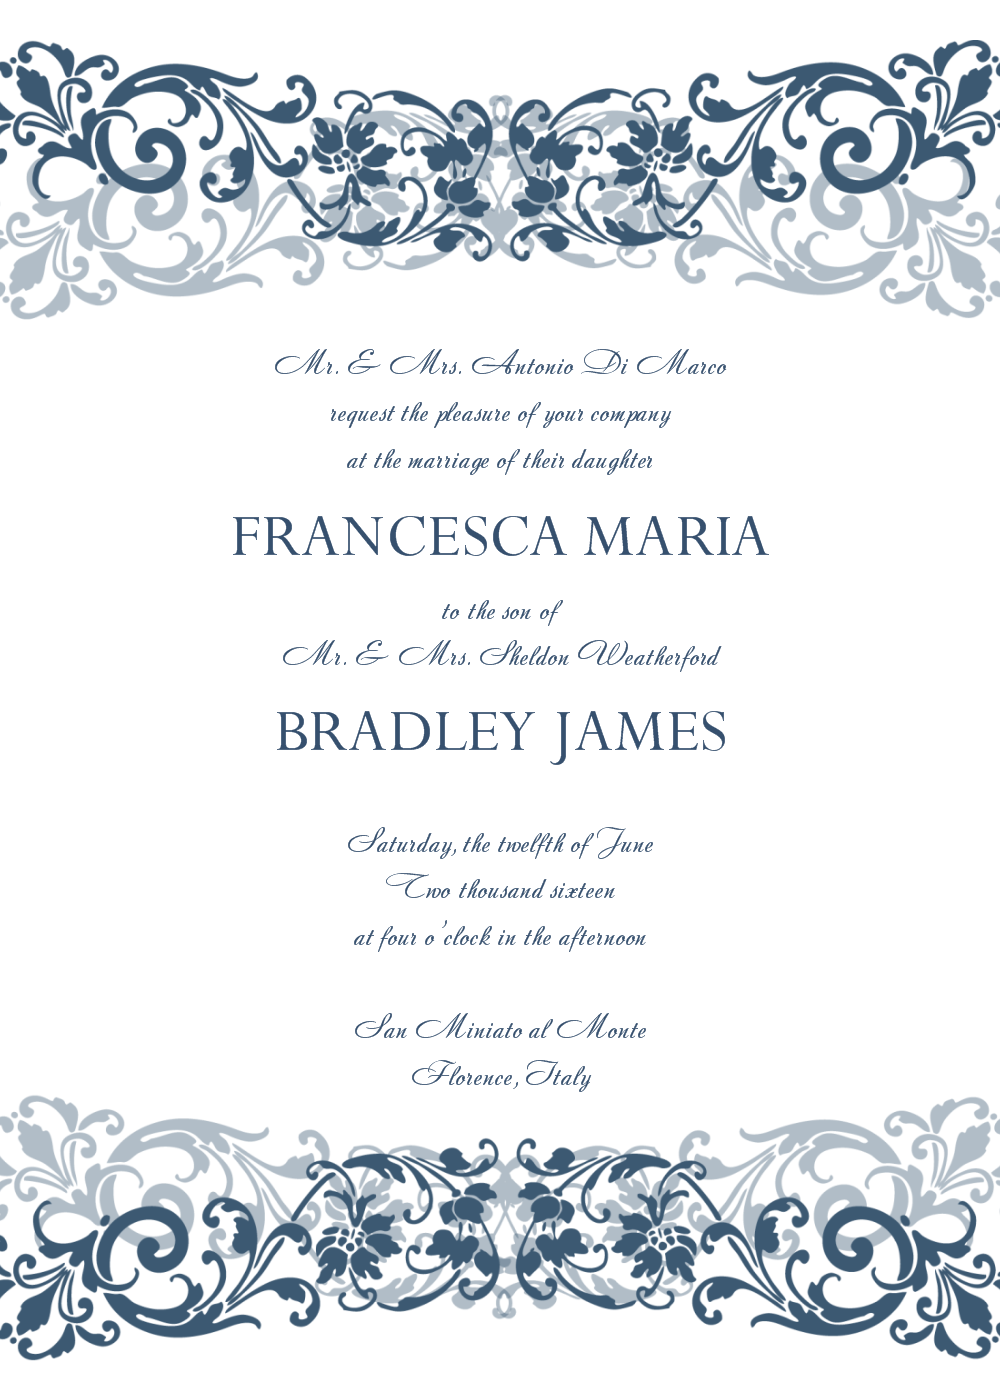 print-wedding-invite-template-with-a-different-divine-decorationPDFs